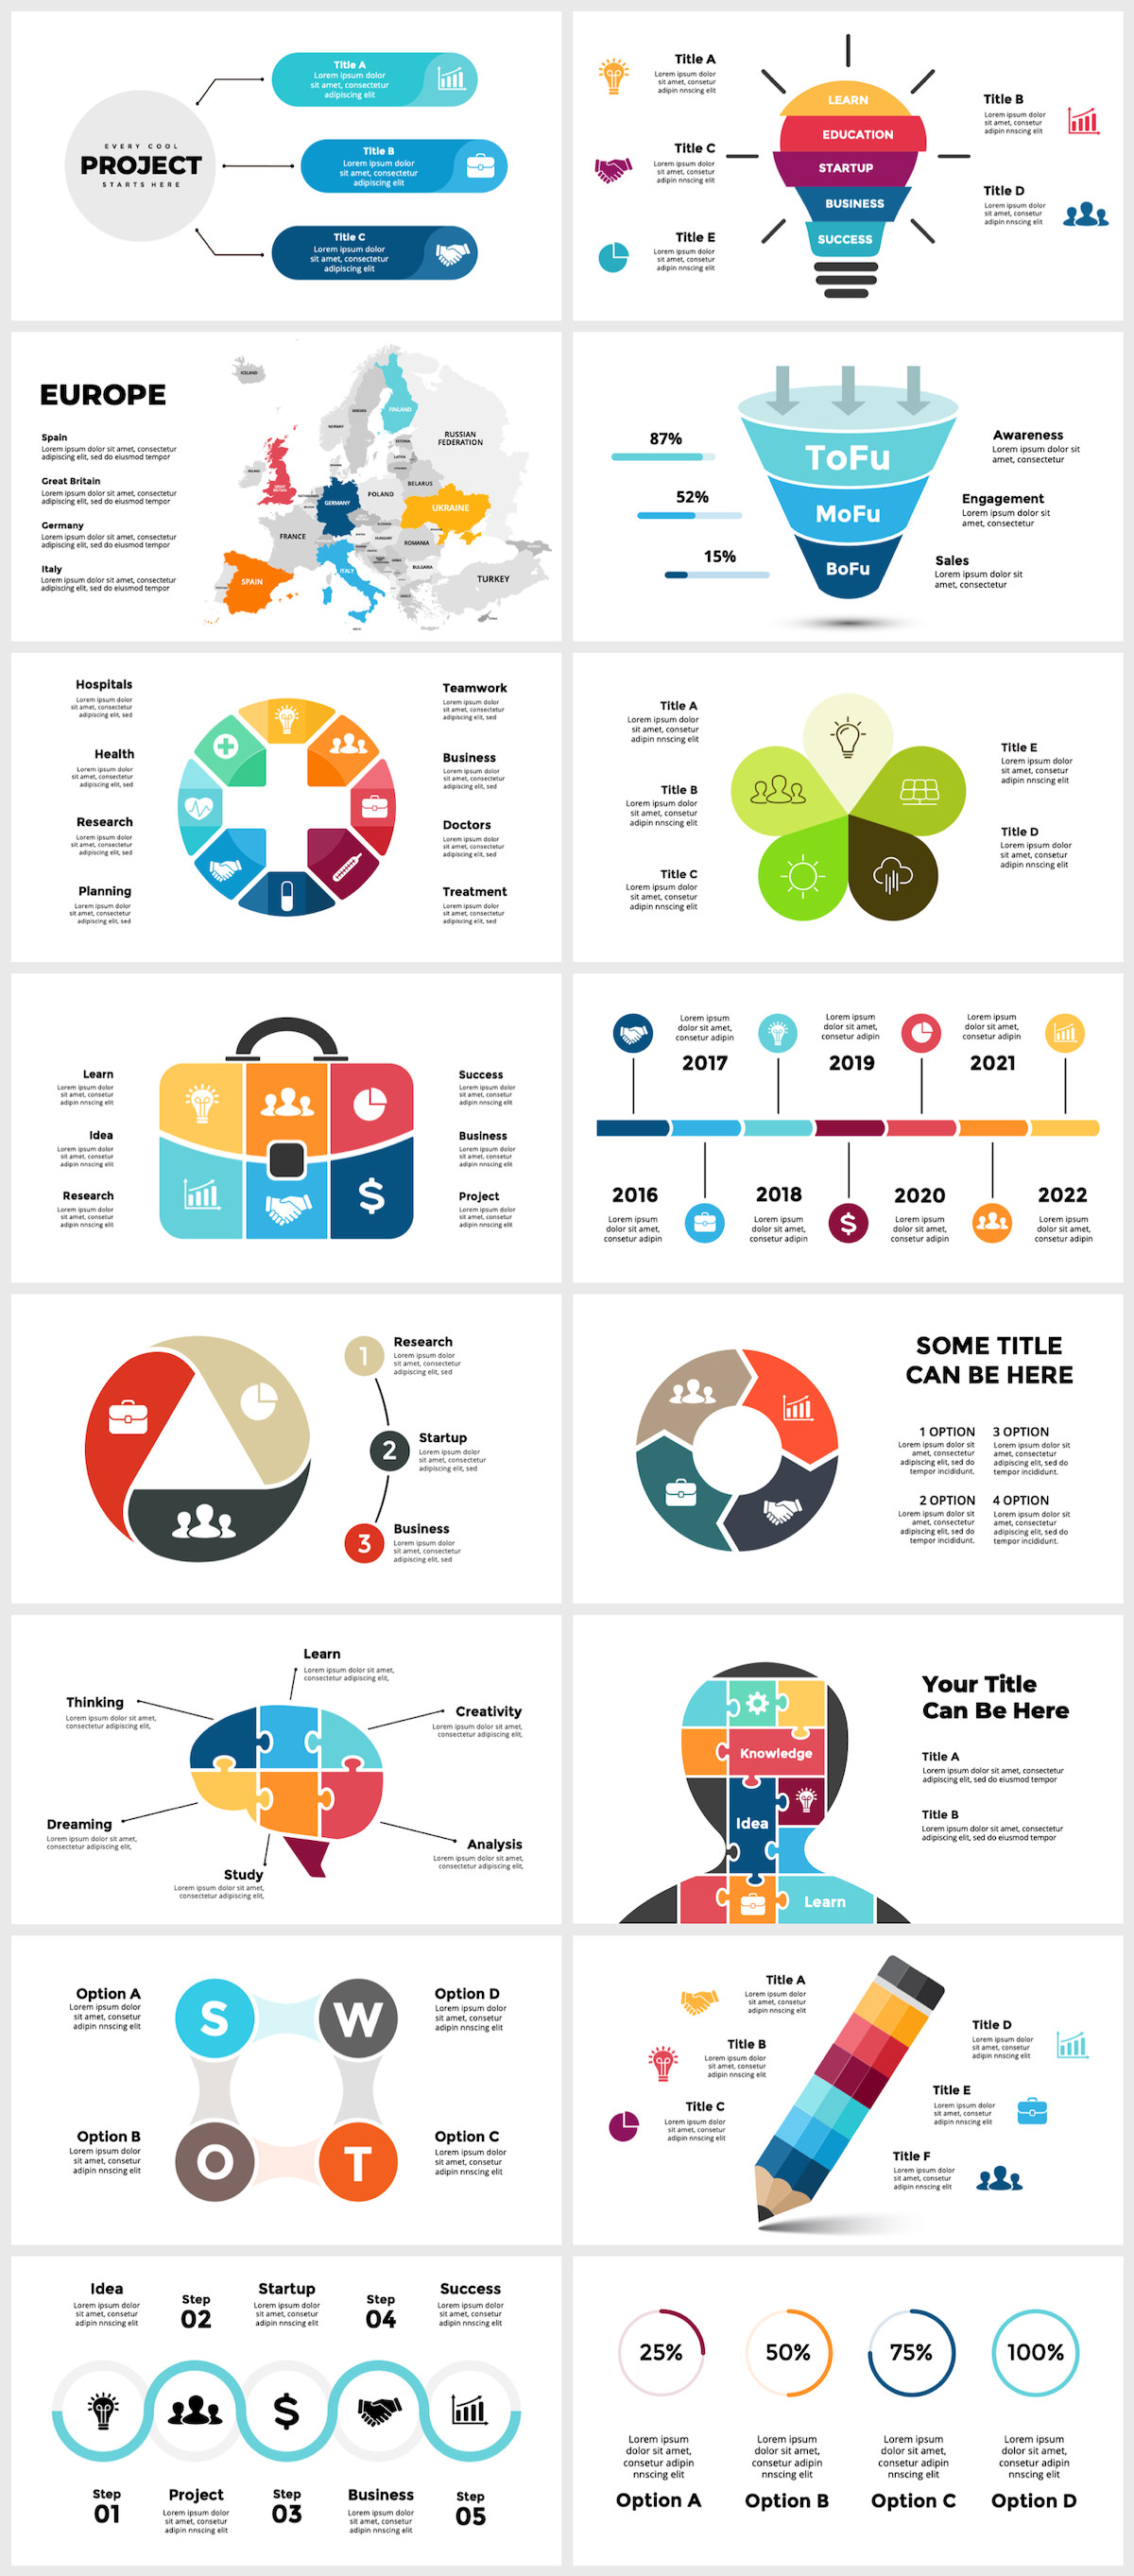 Wowly - 3500 Infographics & Presentation Templates! Updated! PowerPoint Canva Figma Sketch Ai Psd. - 110